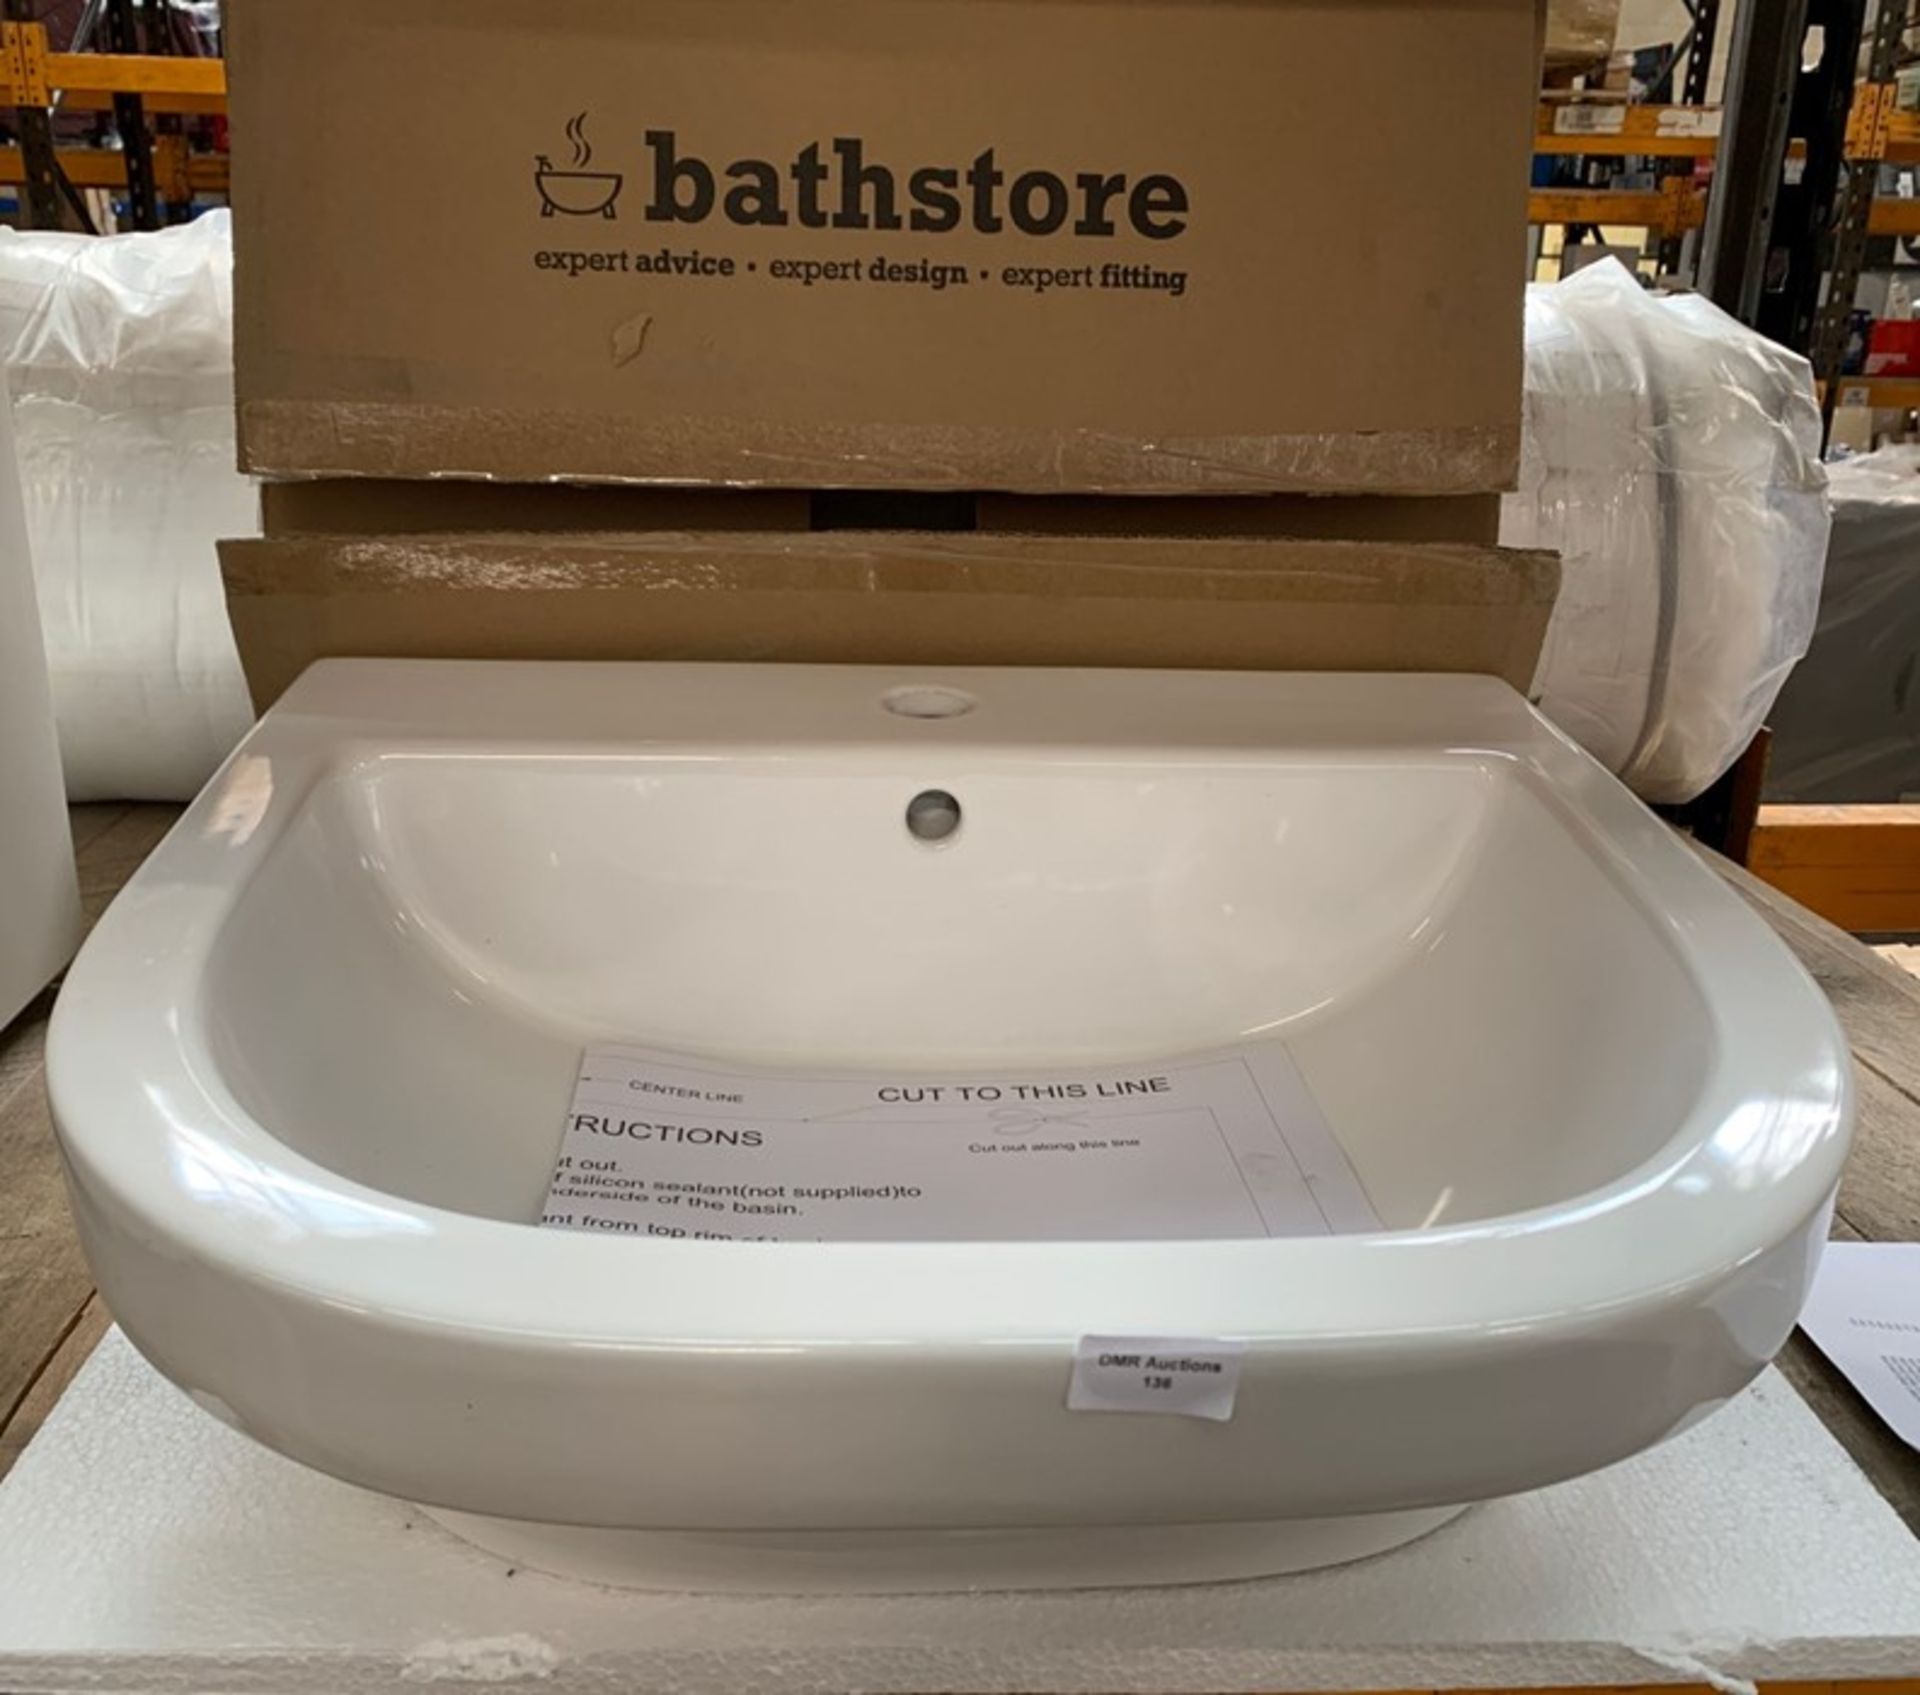 BATHSTORE 560 X 470MM EURO MONO SEMI RECESSED BASIN WITH FITTING TEMPLATE RRP £275